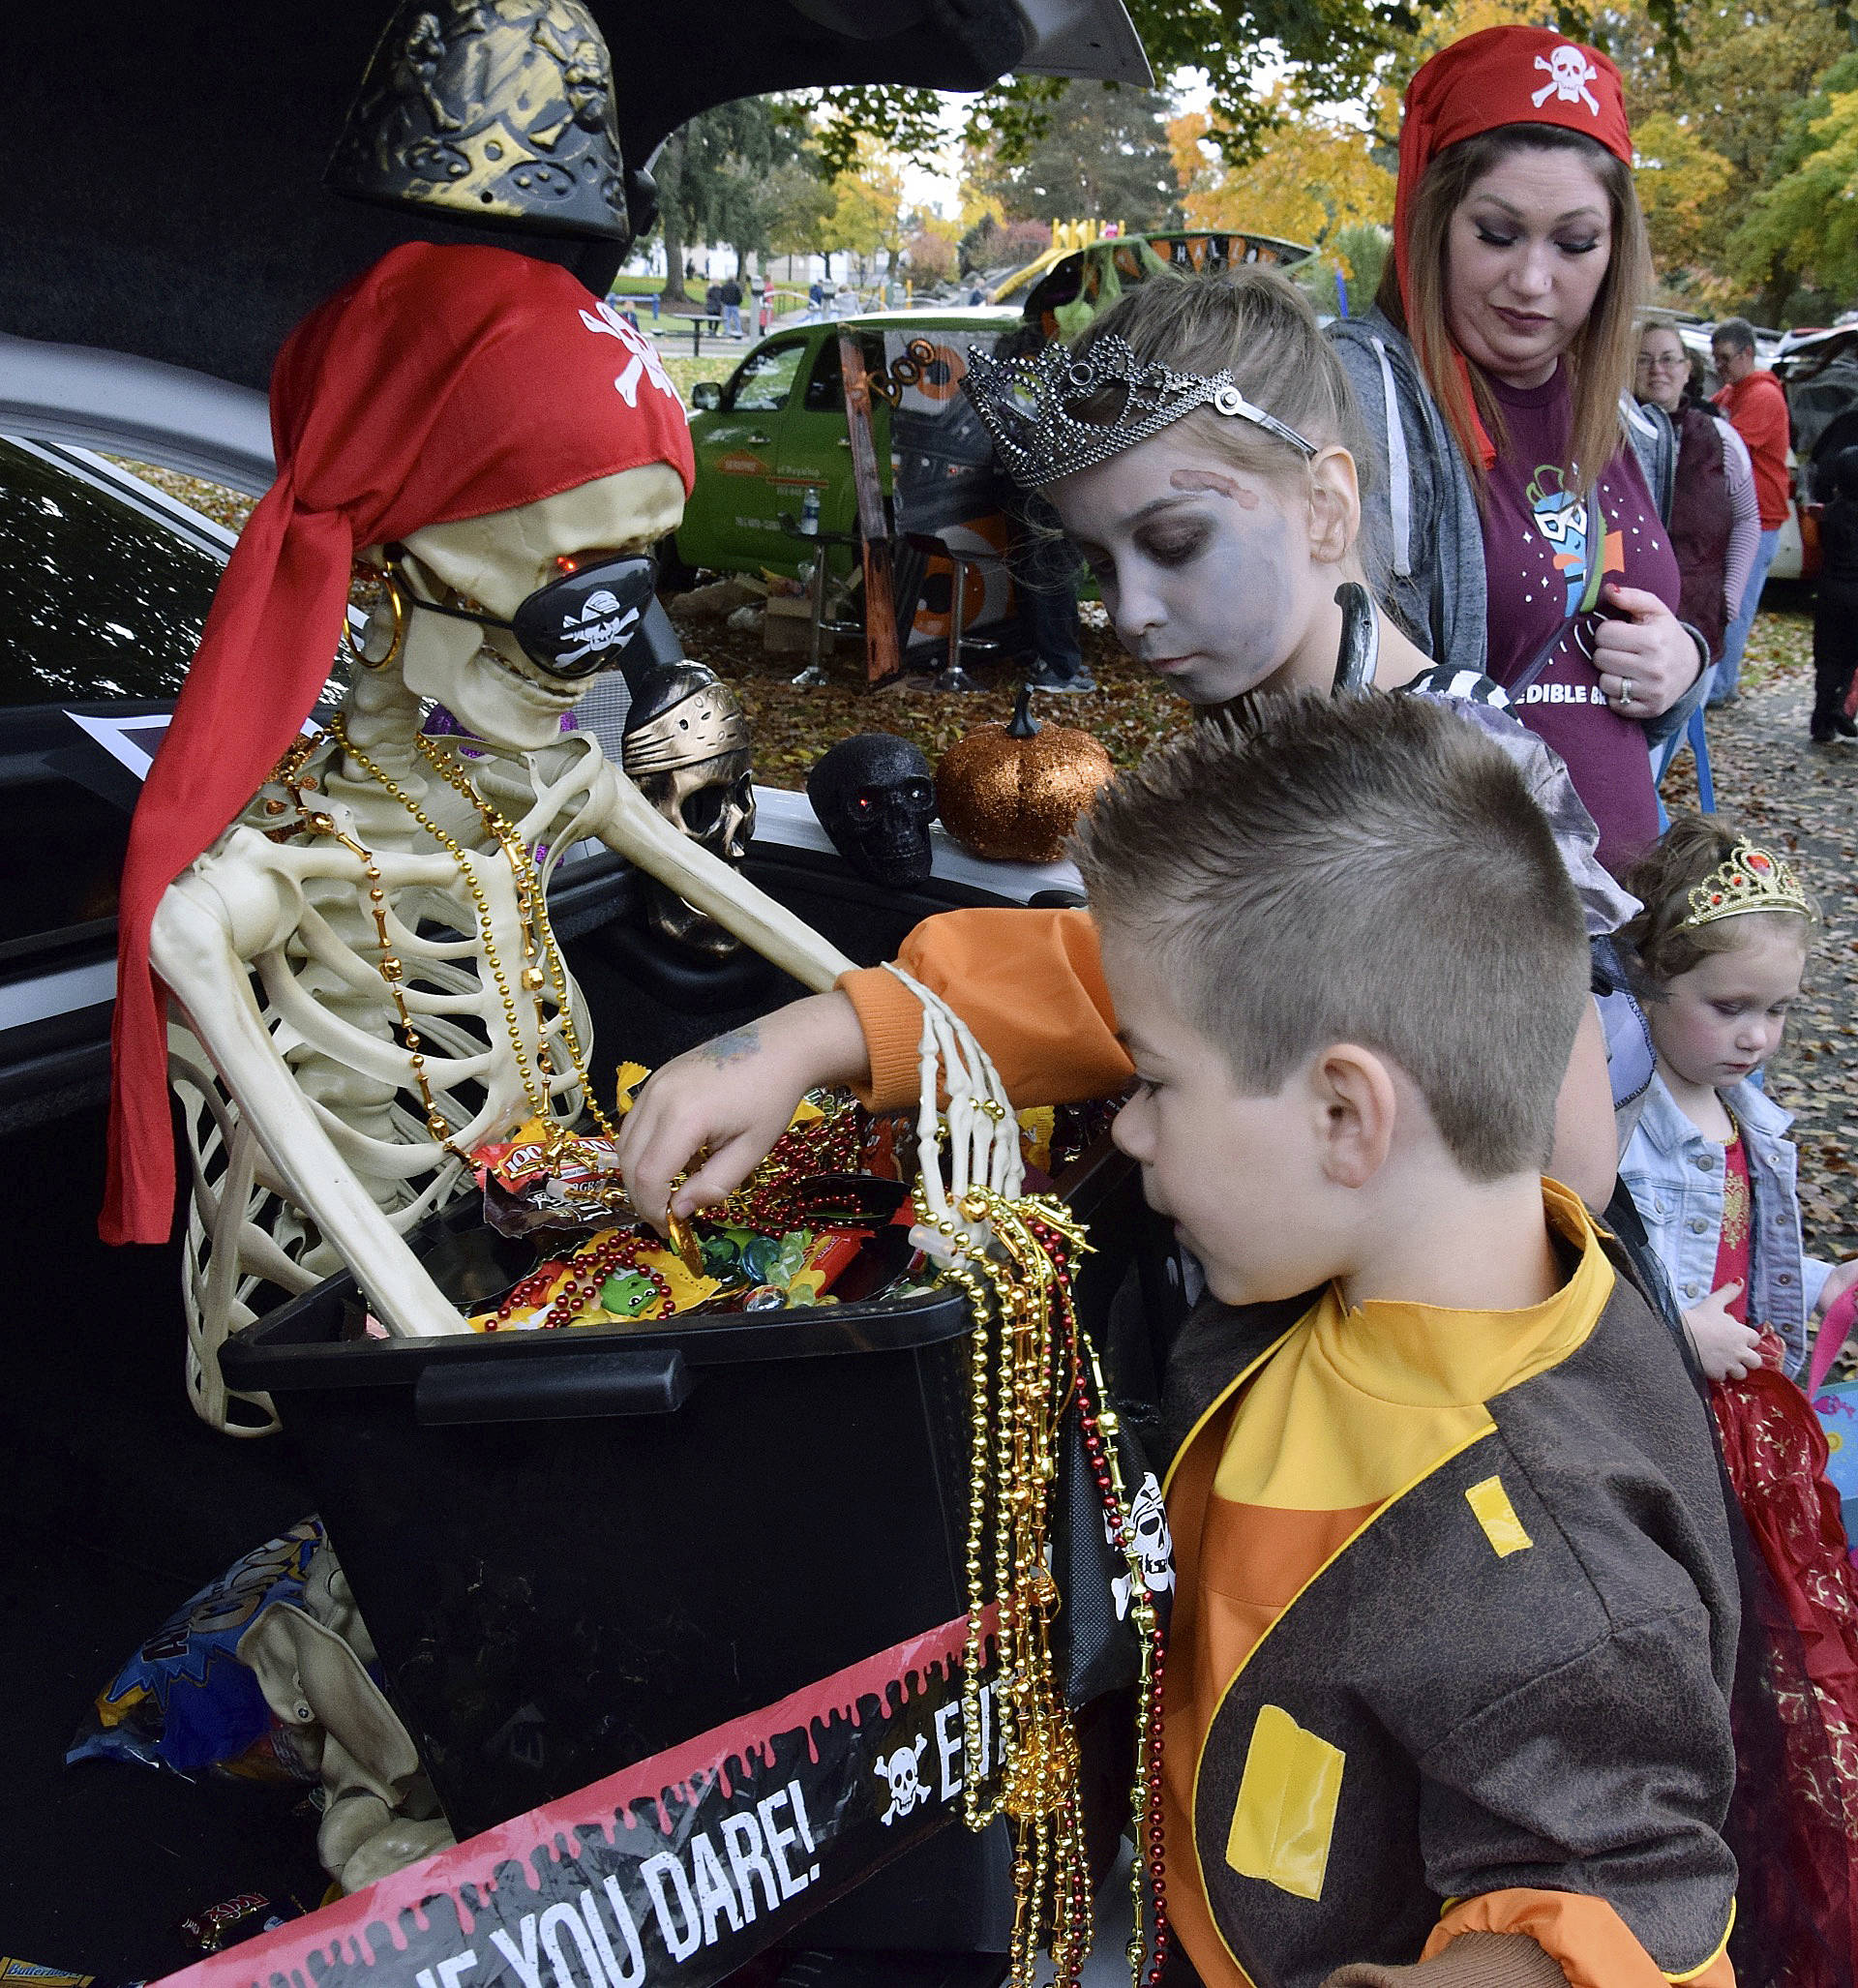 Krystal Sanders as a pirate has Shaylee Bonzan, 9, and Landon Gregory, 7, get candy from the treasure chest. RACHEL CIAMPI, Auburn Reporter